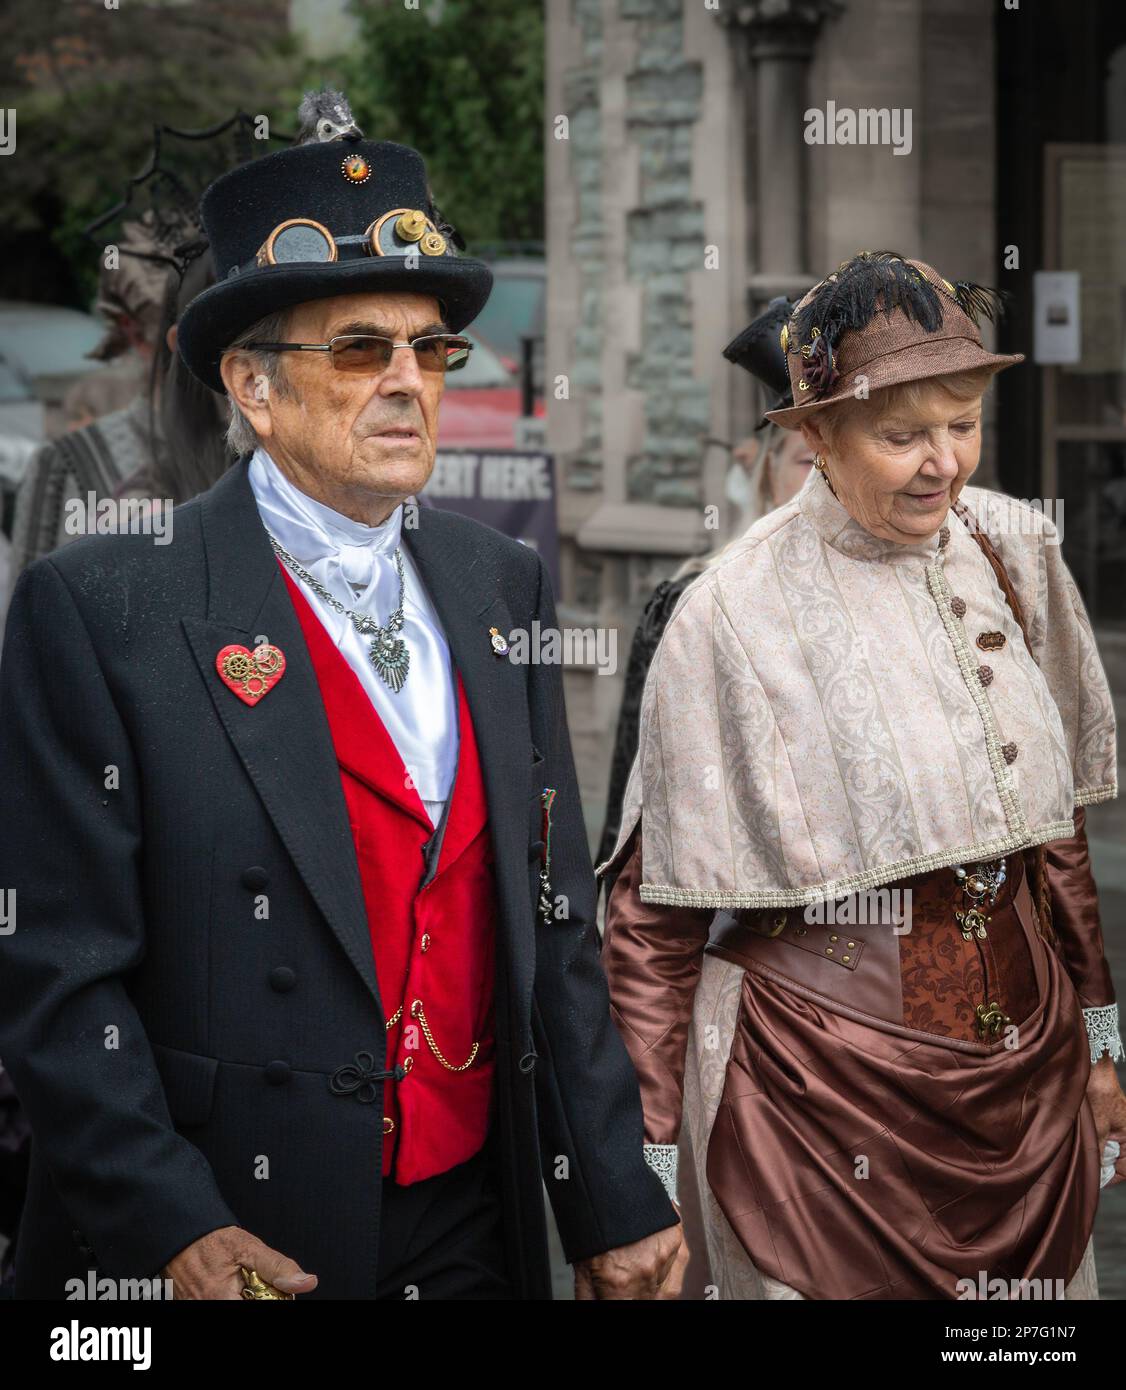 Two older steampunks that have a rerofuturistic Victorian appearance. Stock Photo